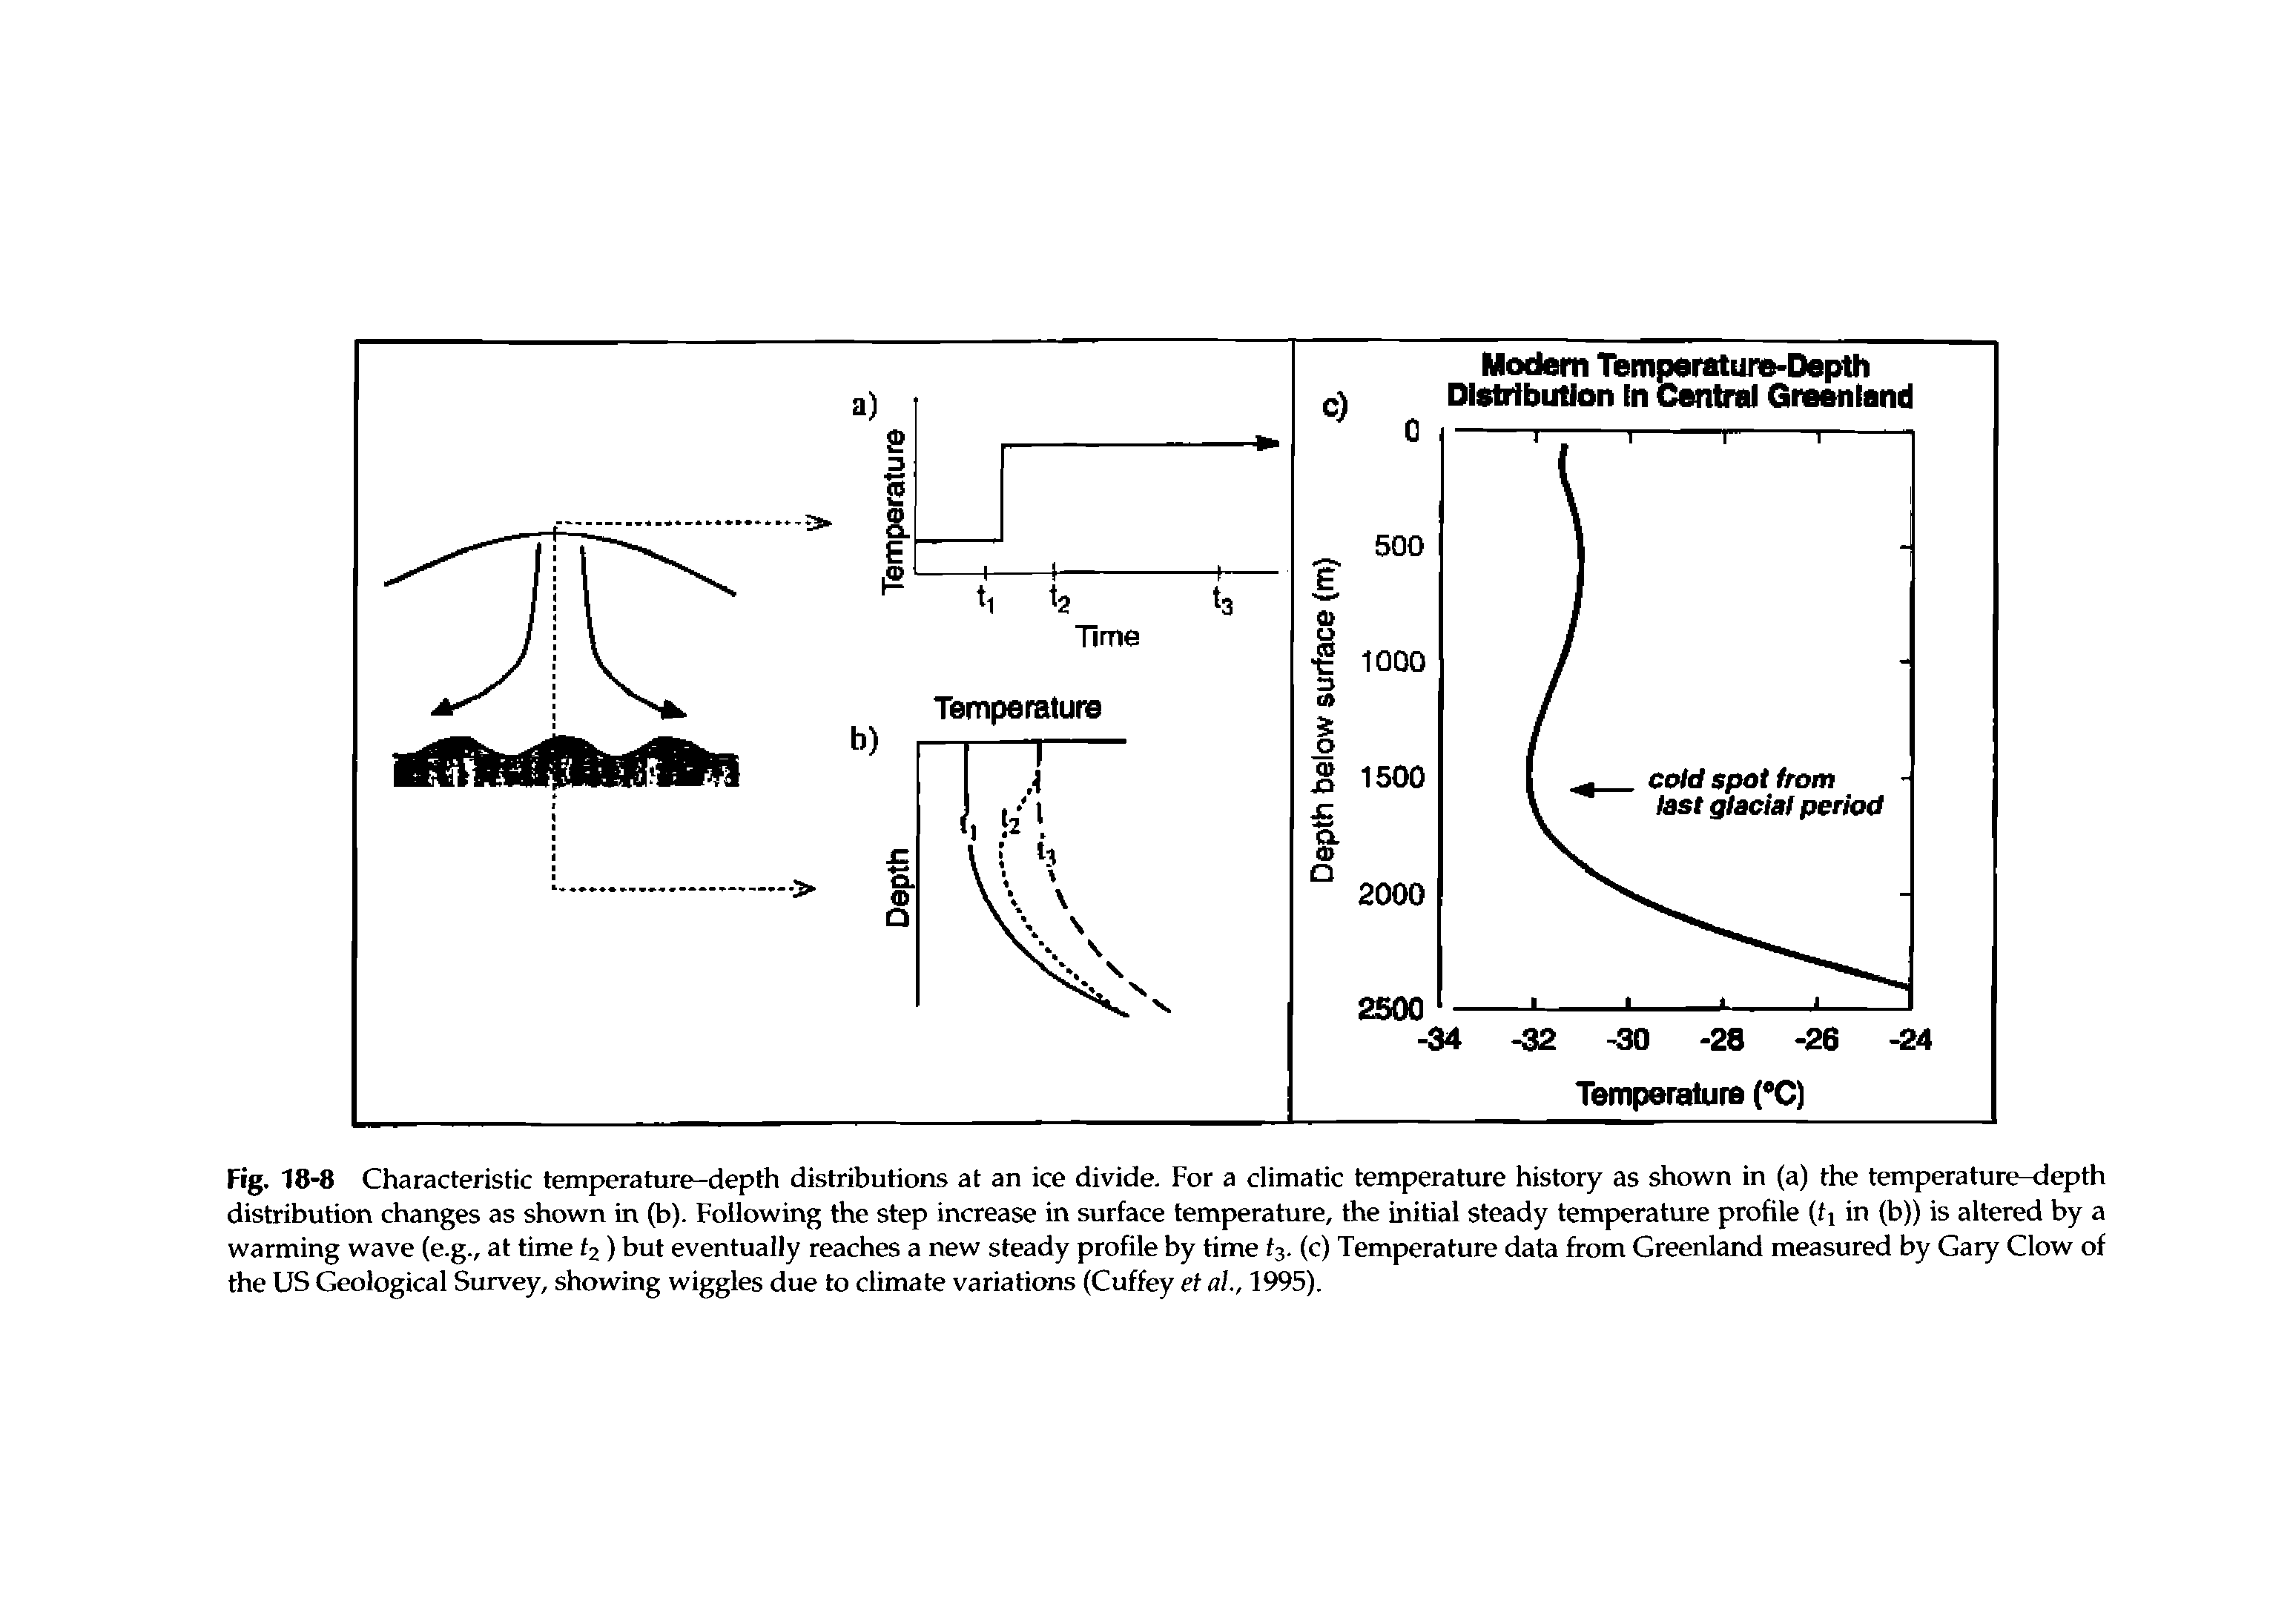 Fig. 18-8 Characteristic temperature-depth distributions at an ice divide. For a climatic temperature history as shown in (a) the temperature-depth distribution changes as shown in (b). Following the step increase in surface temperature, the initial steady temperature profile (fi in (b)) is altered by a warming wave (e.g., at time fa) but eventually reaches a new steady profile by time t. (c) Temperature data from Greenland measured by Gary Clow of the US Geological Survey, showing wiggles due to climate variations (Cuffey et ah, 1995).